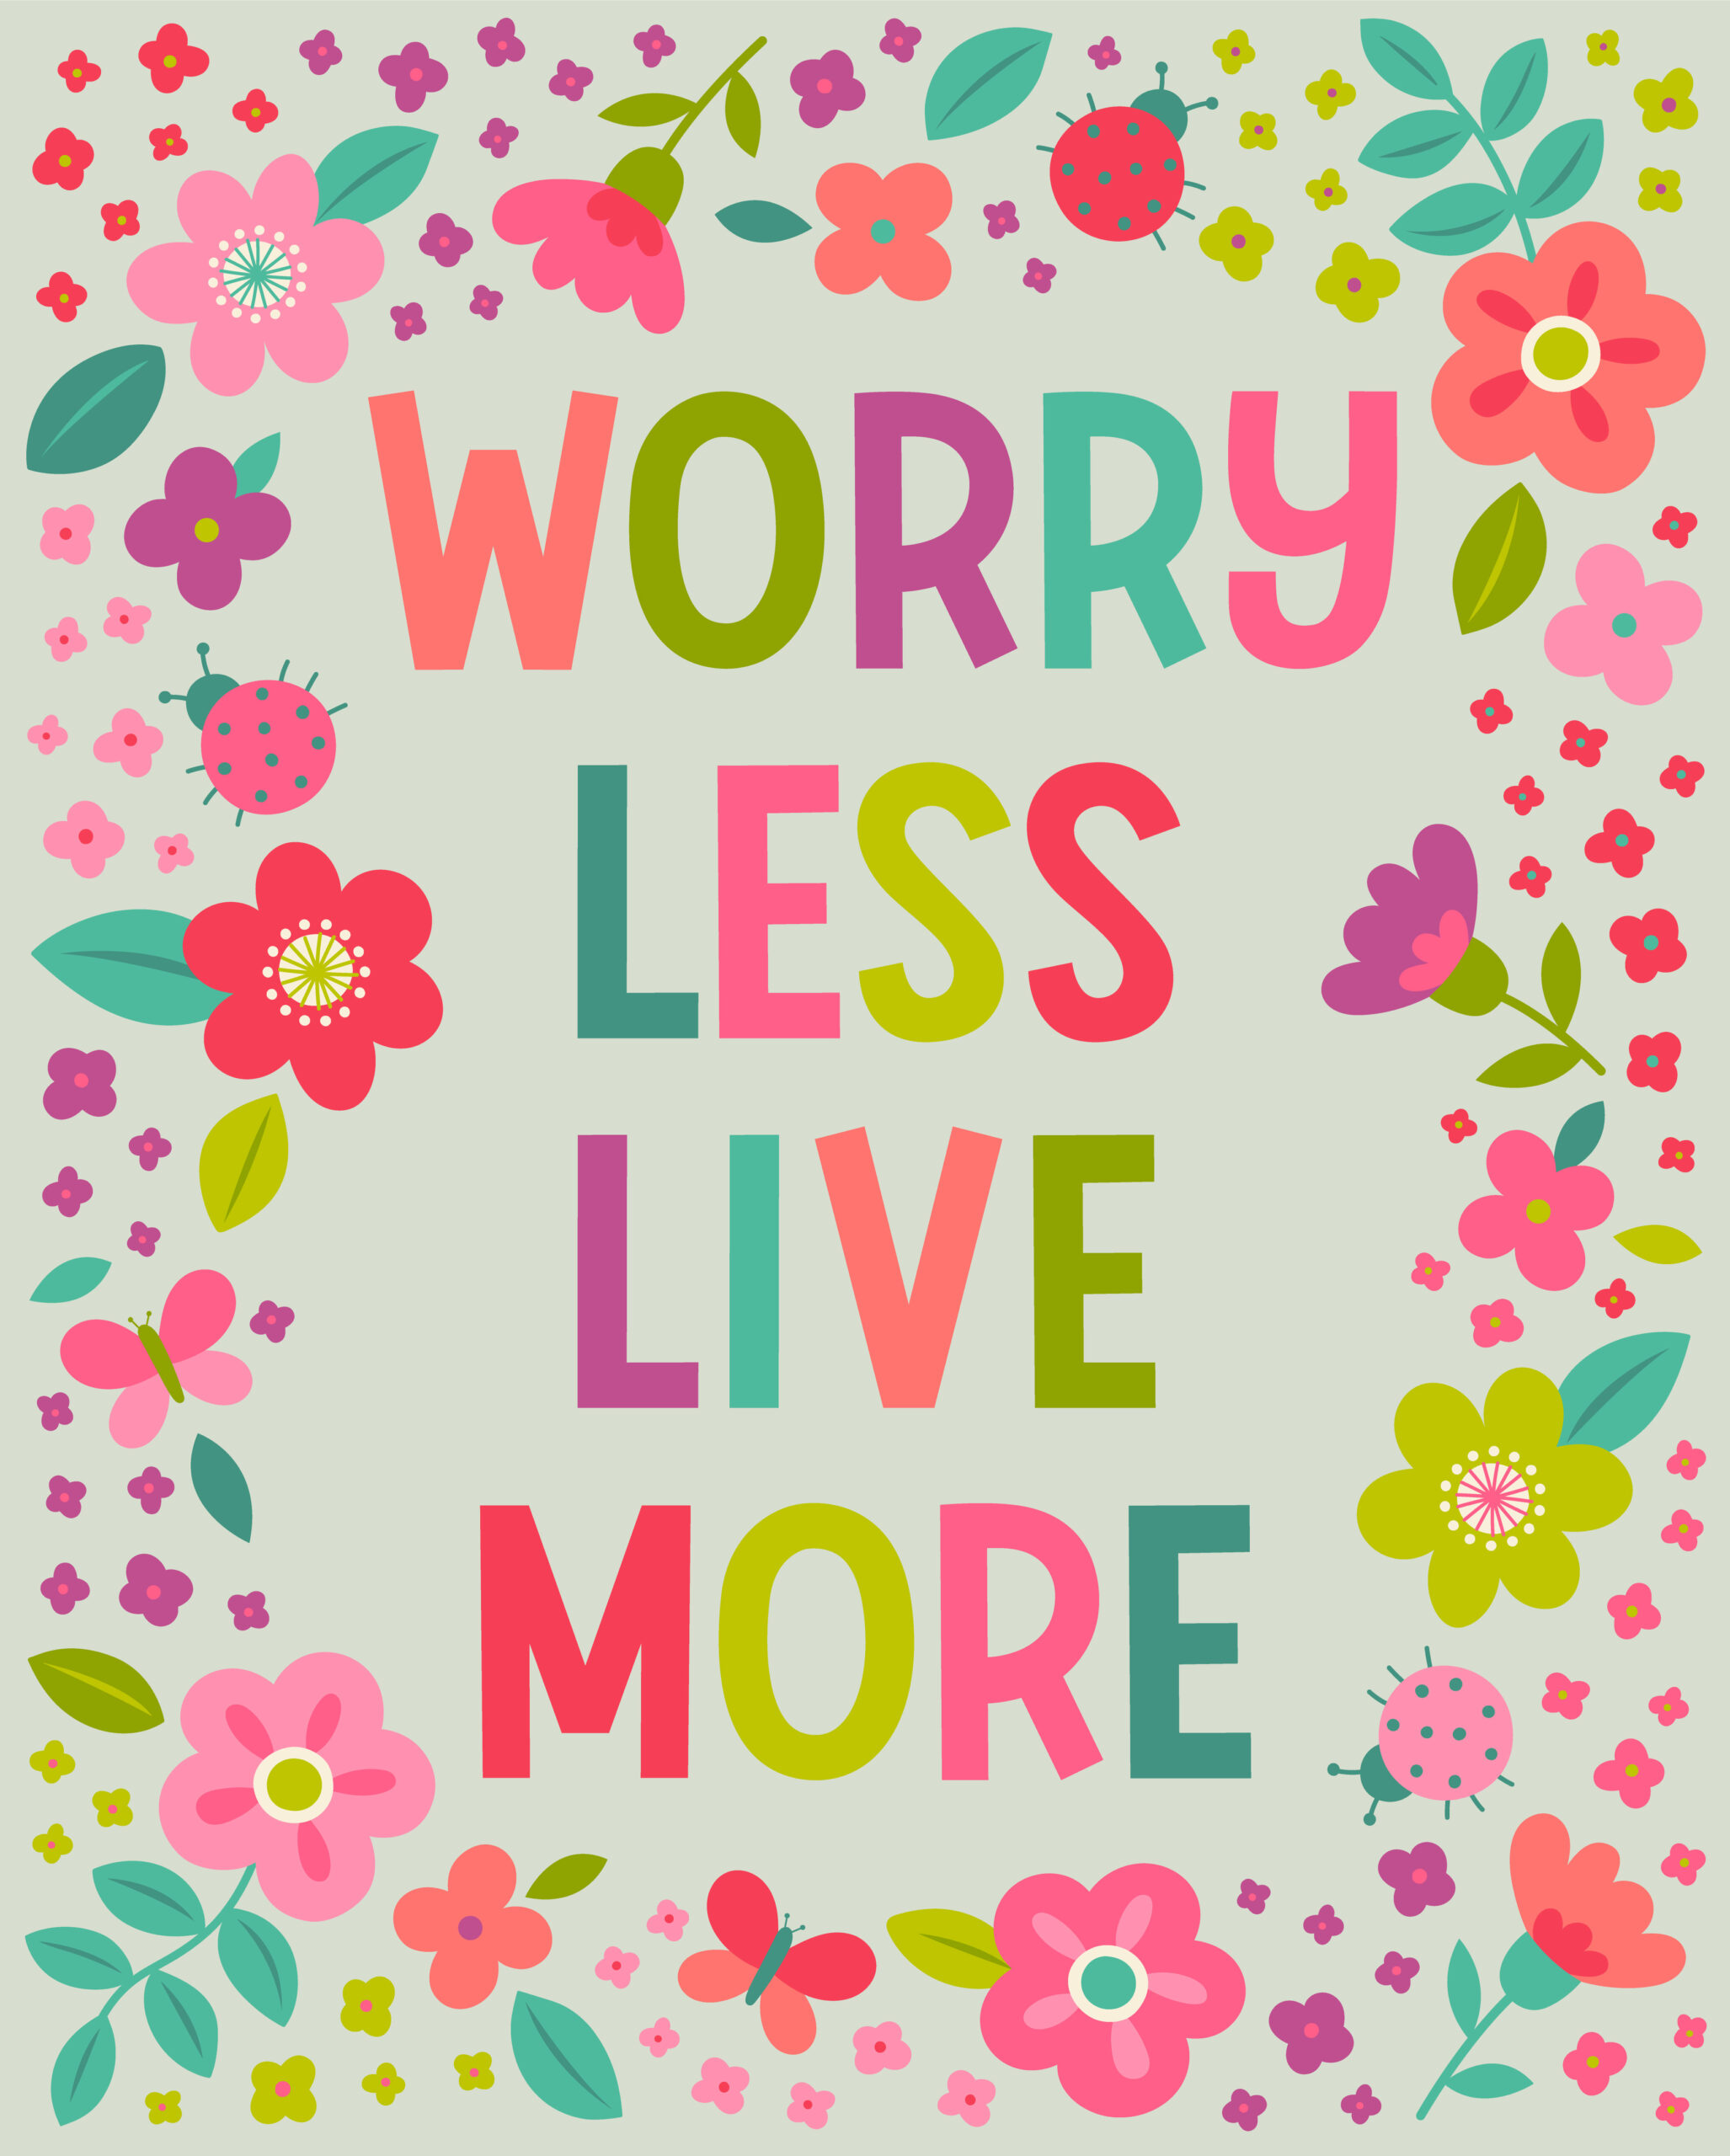 Worry less live more colorful artwork<br />
